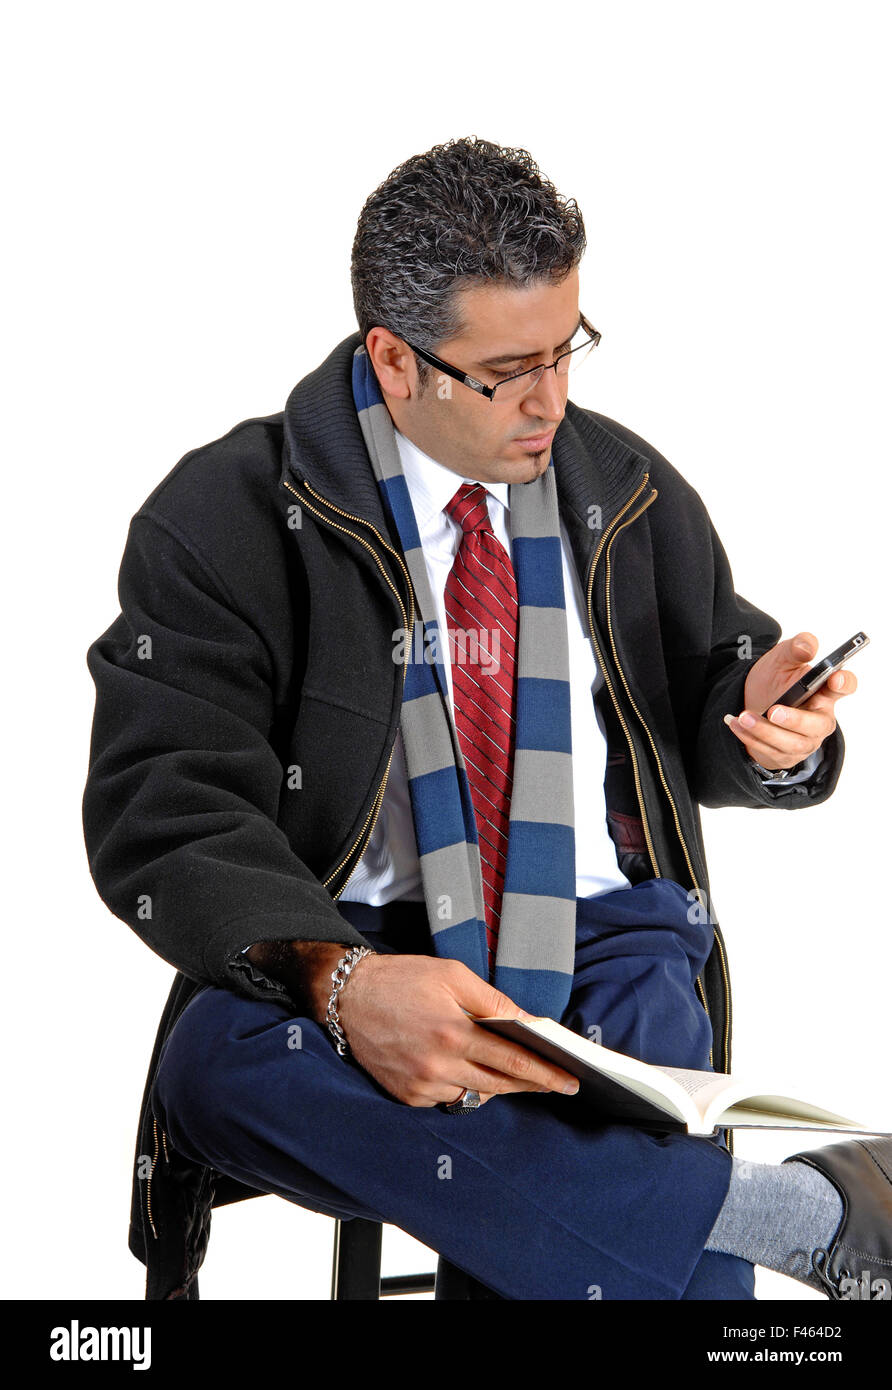 Man on the cell phone. Stock Photo